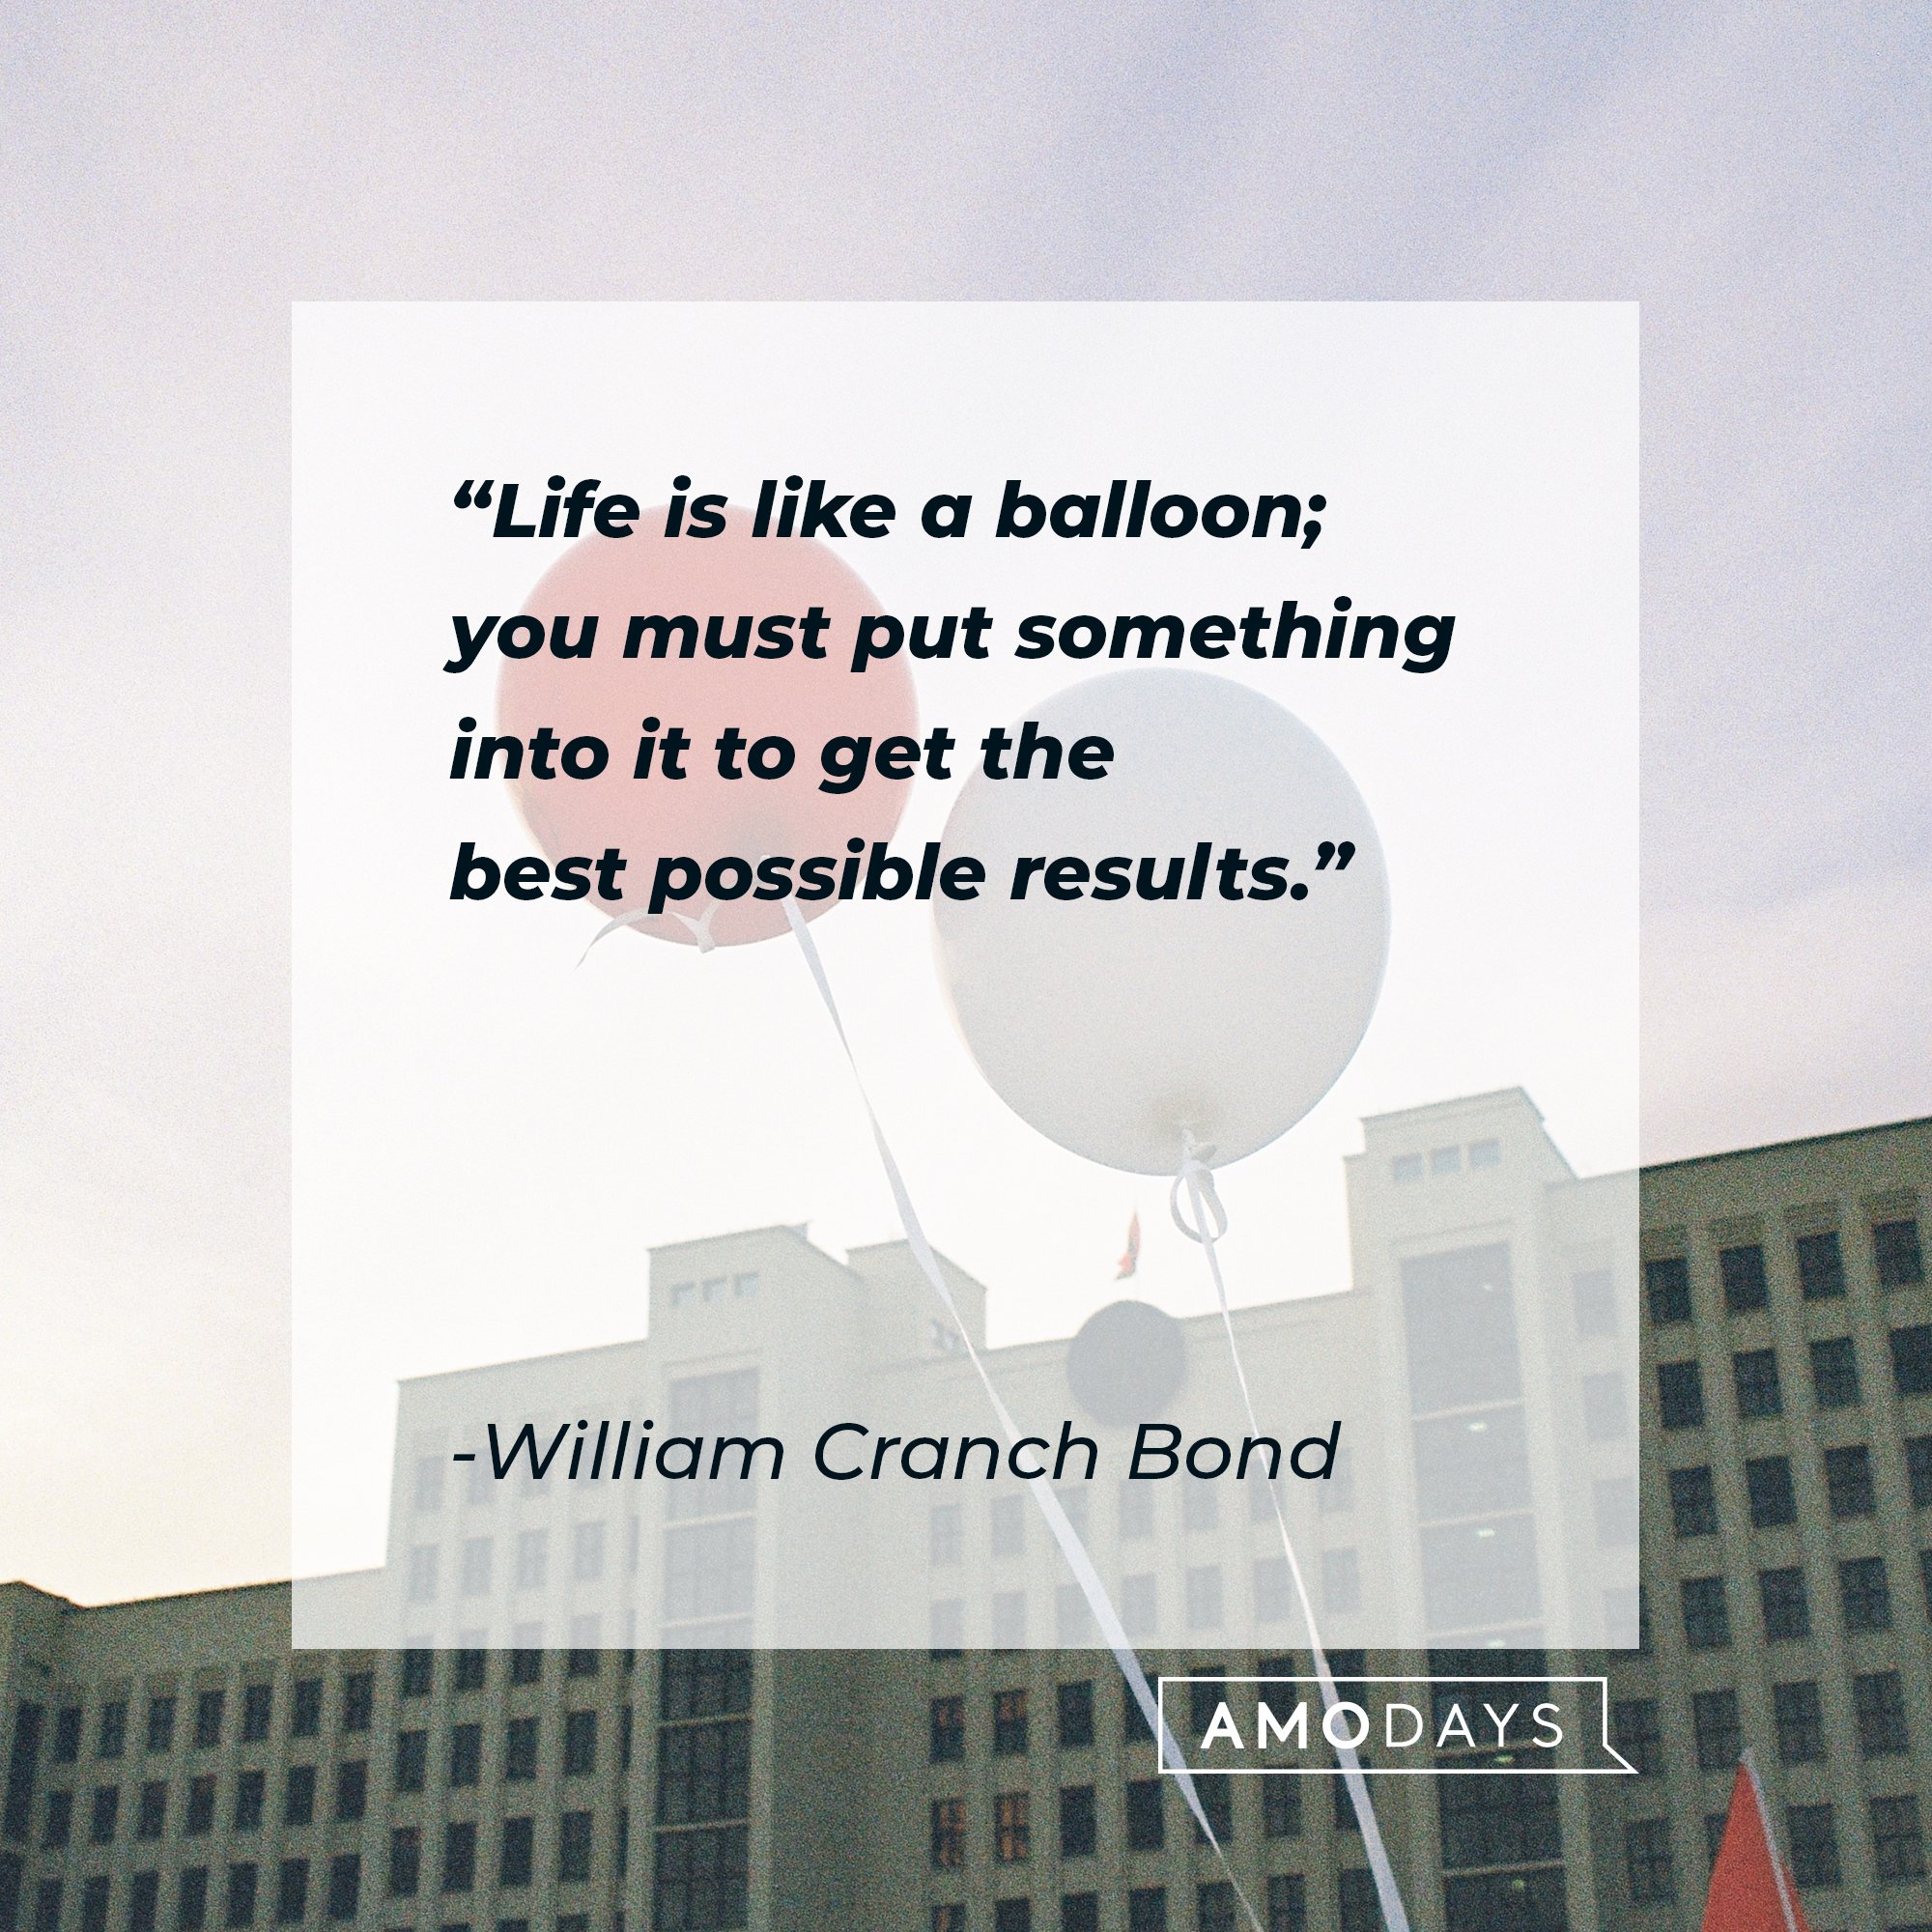 William Cranch Bond’s quote: "Life is like a balloon; you must put something into it to get the best possible results."  | Image: AmoDays